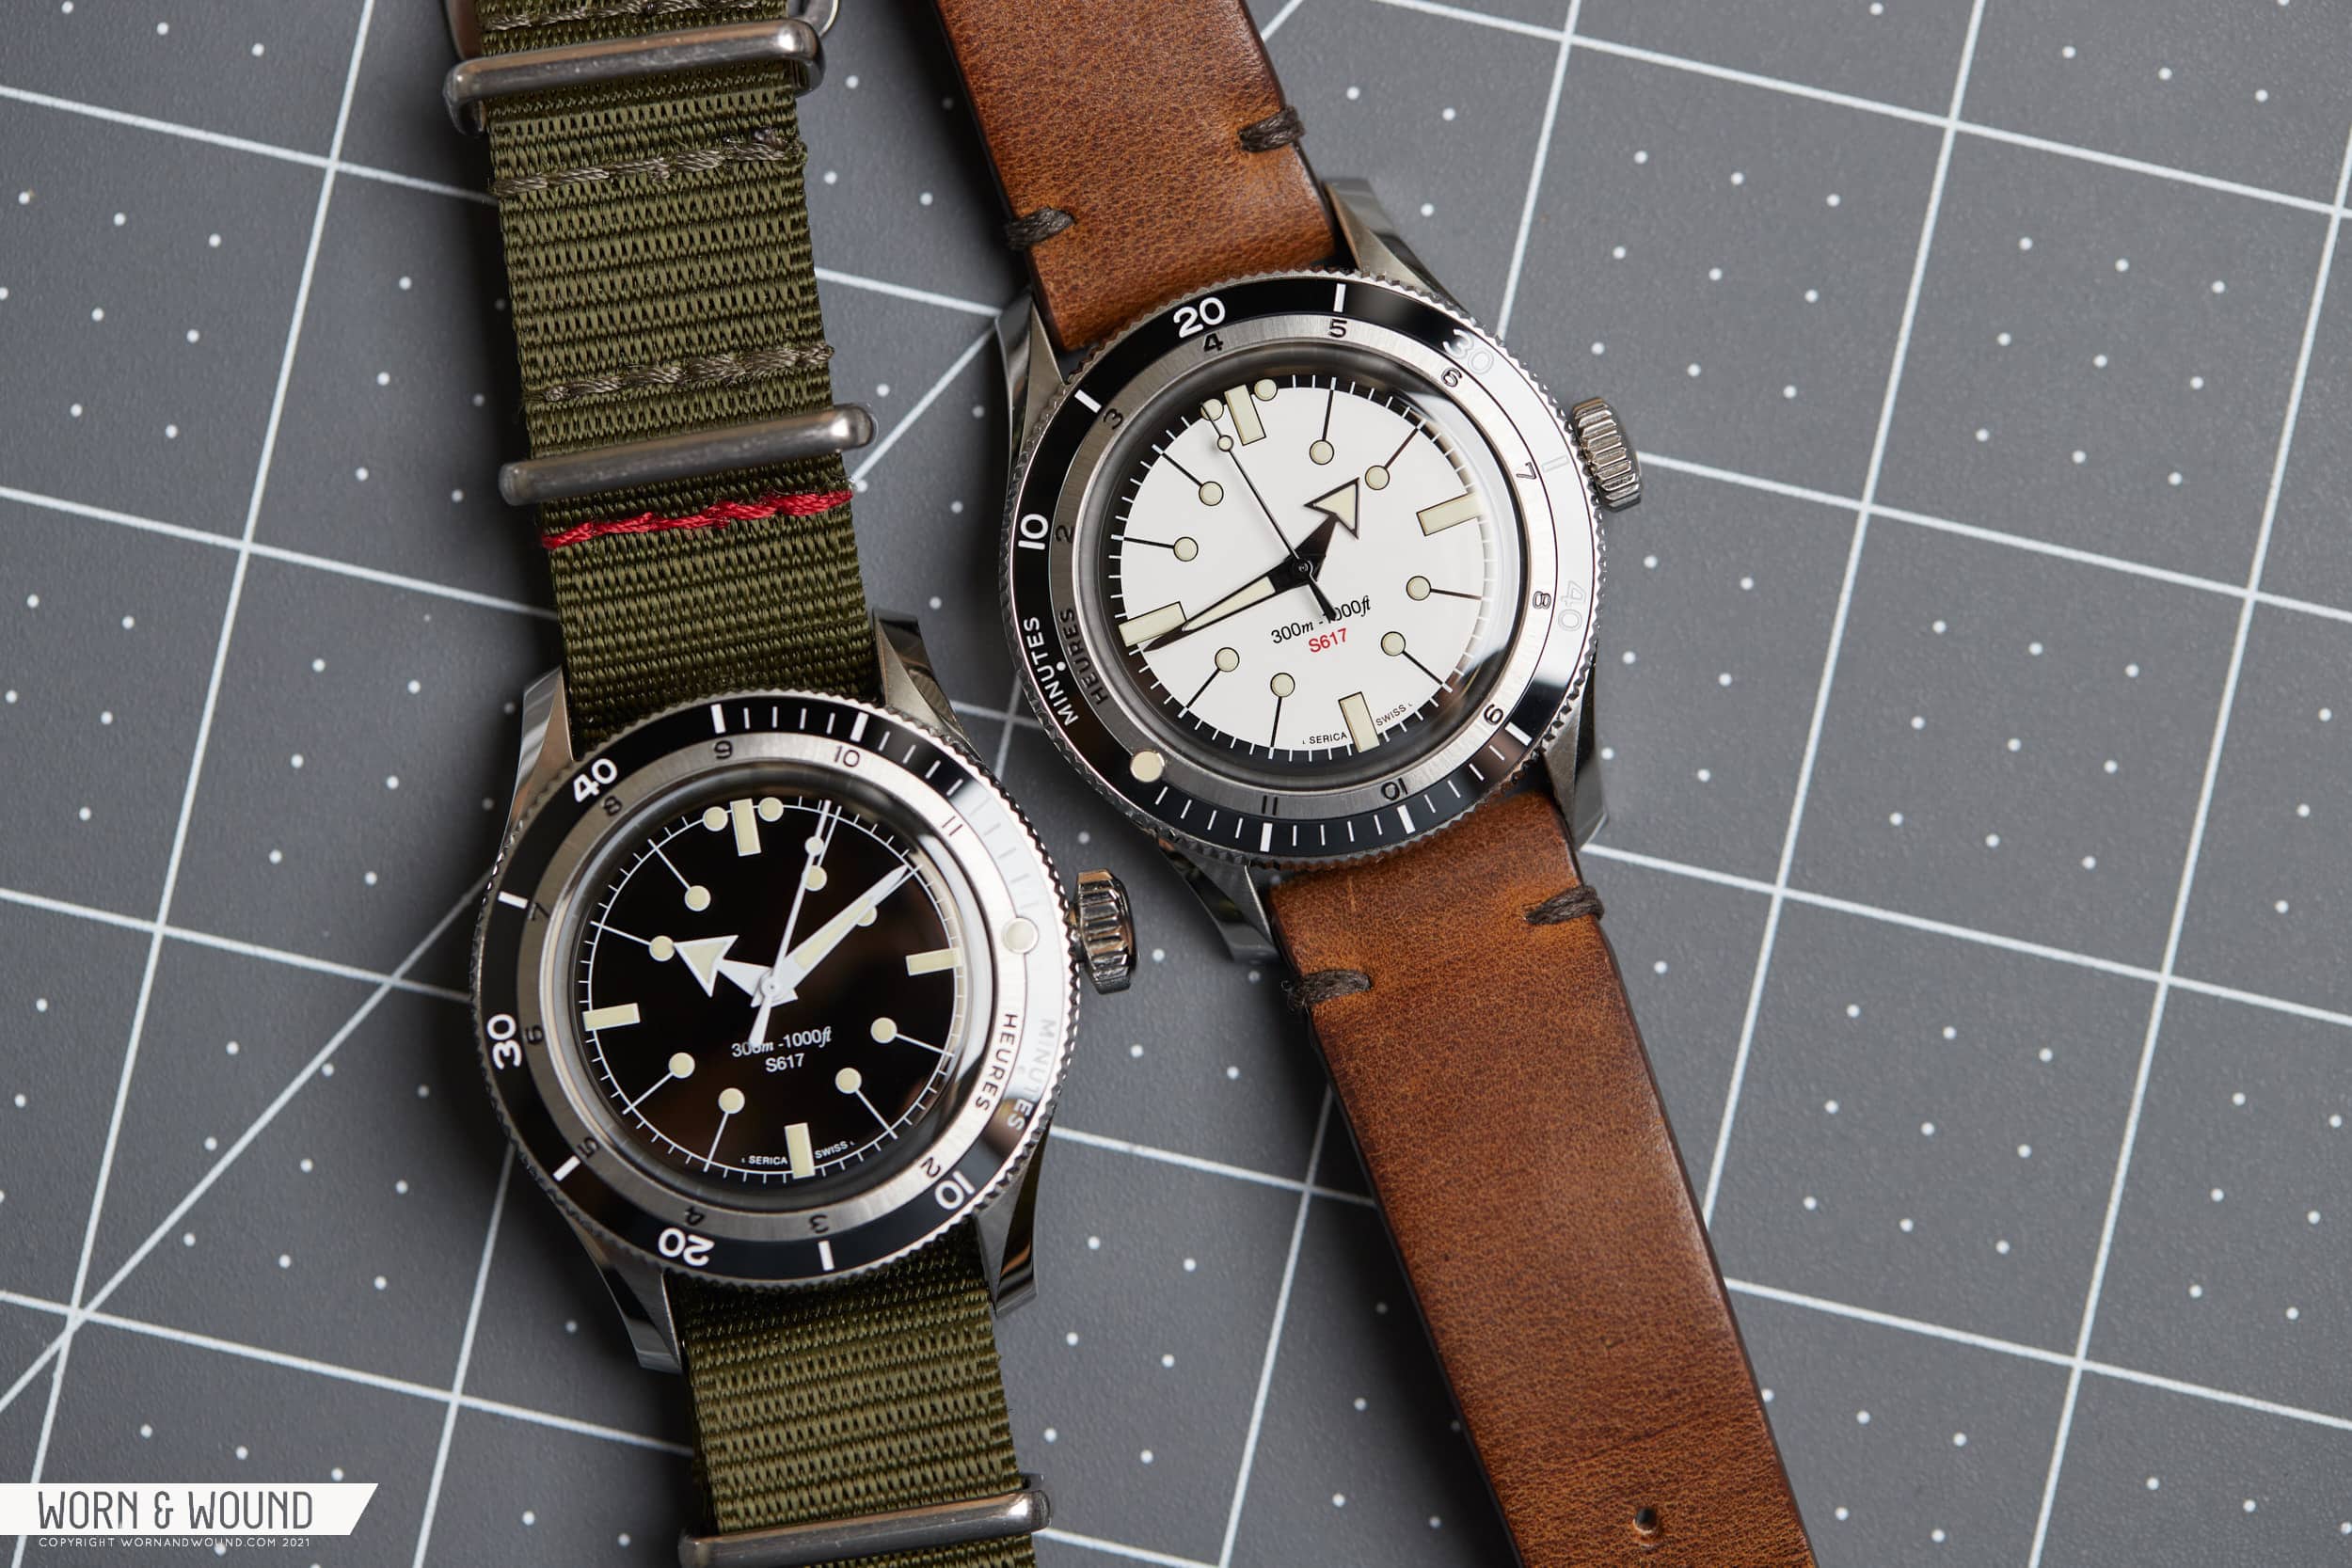 Review: the Serica 5303 Dive Watch - Worn & Wound